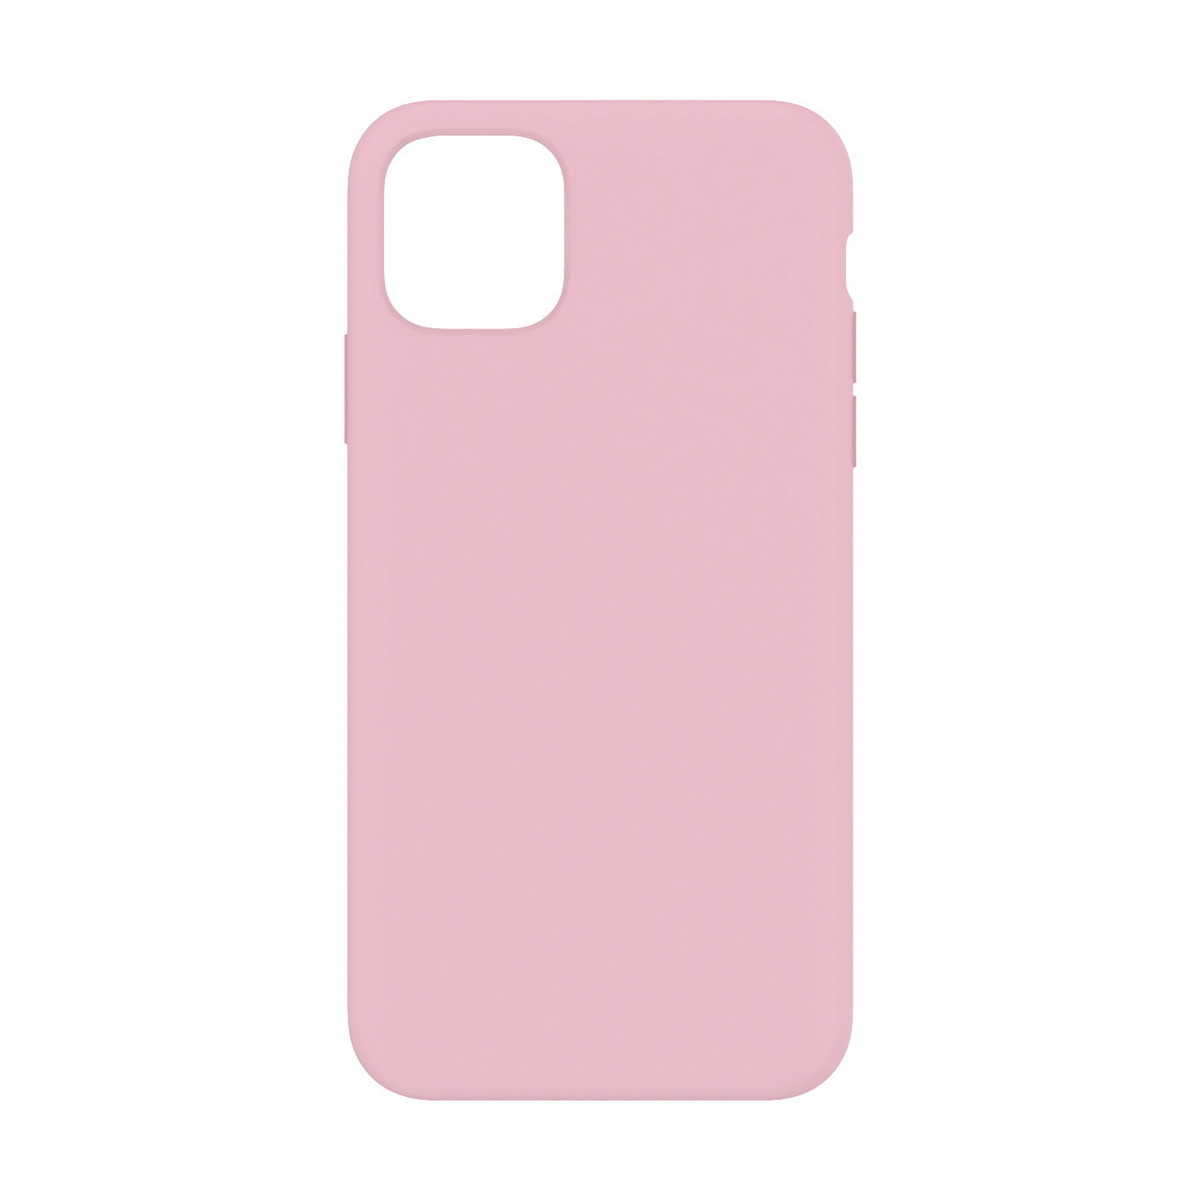 HEAL Case for iPhone 11 (Pink) Case Silicone